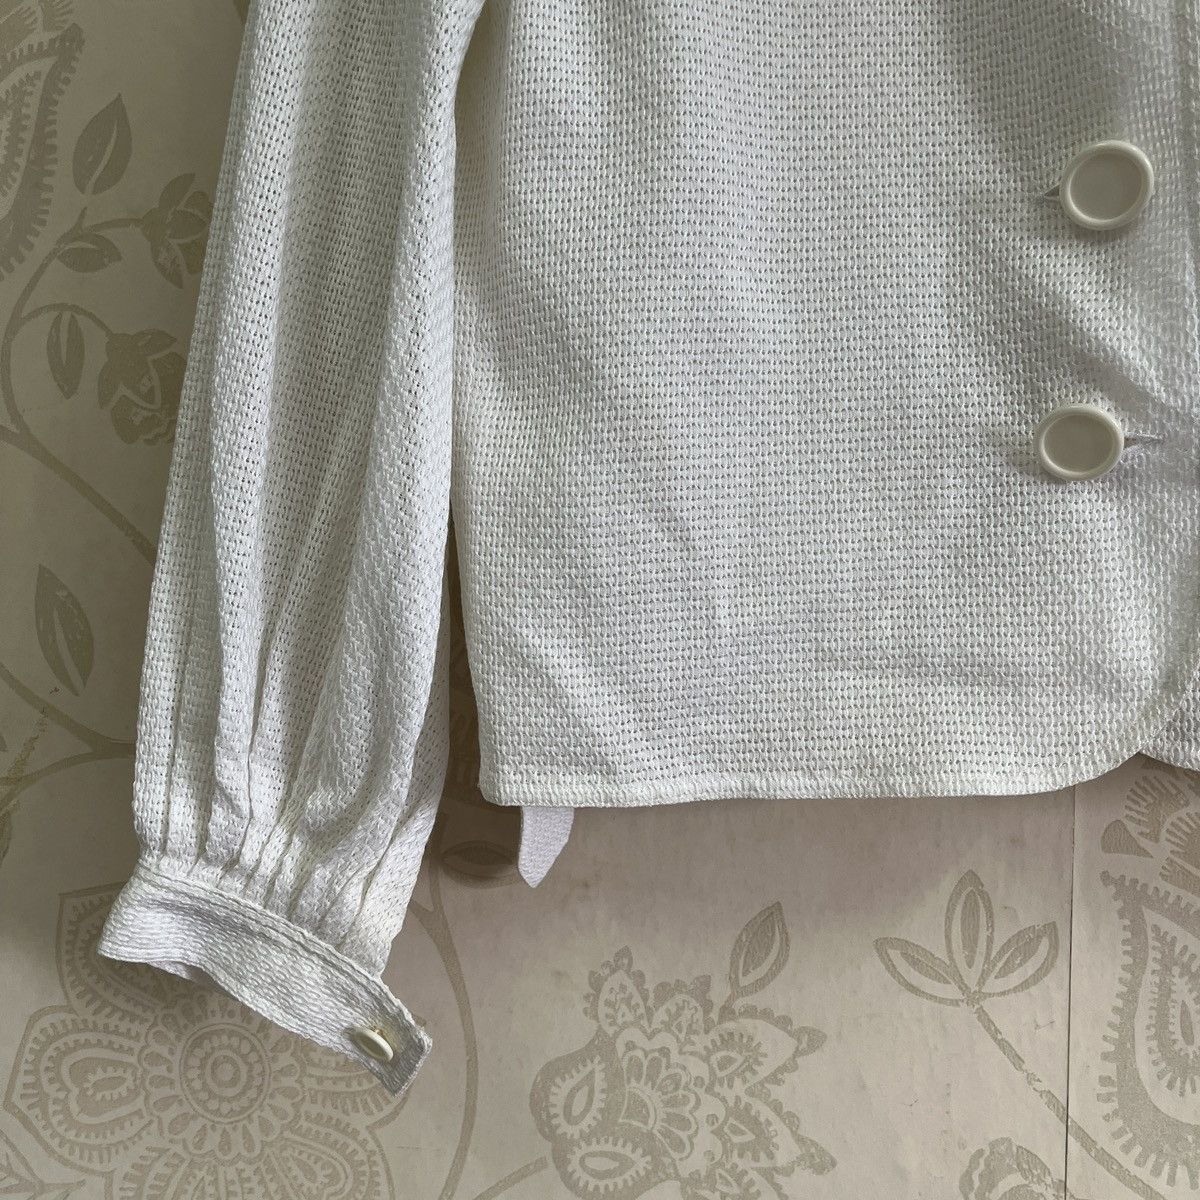 Gently Used Vintage Christian Dior Blouse Size M - 7